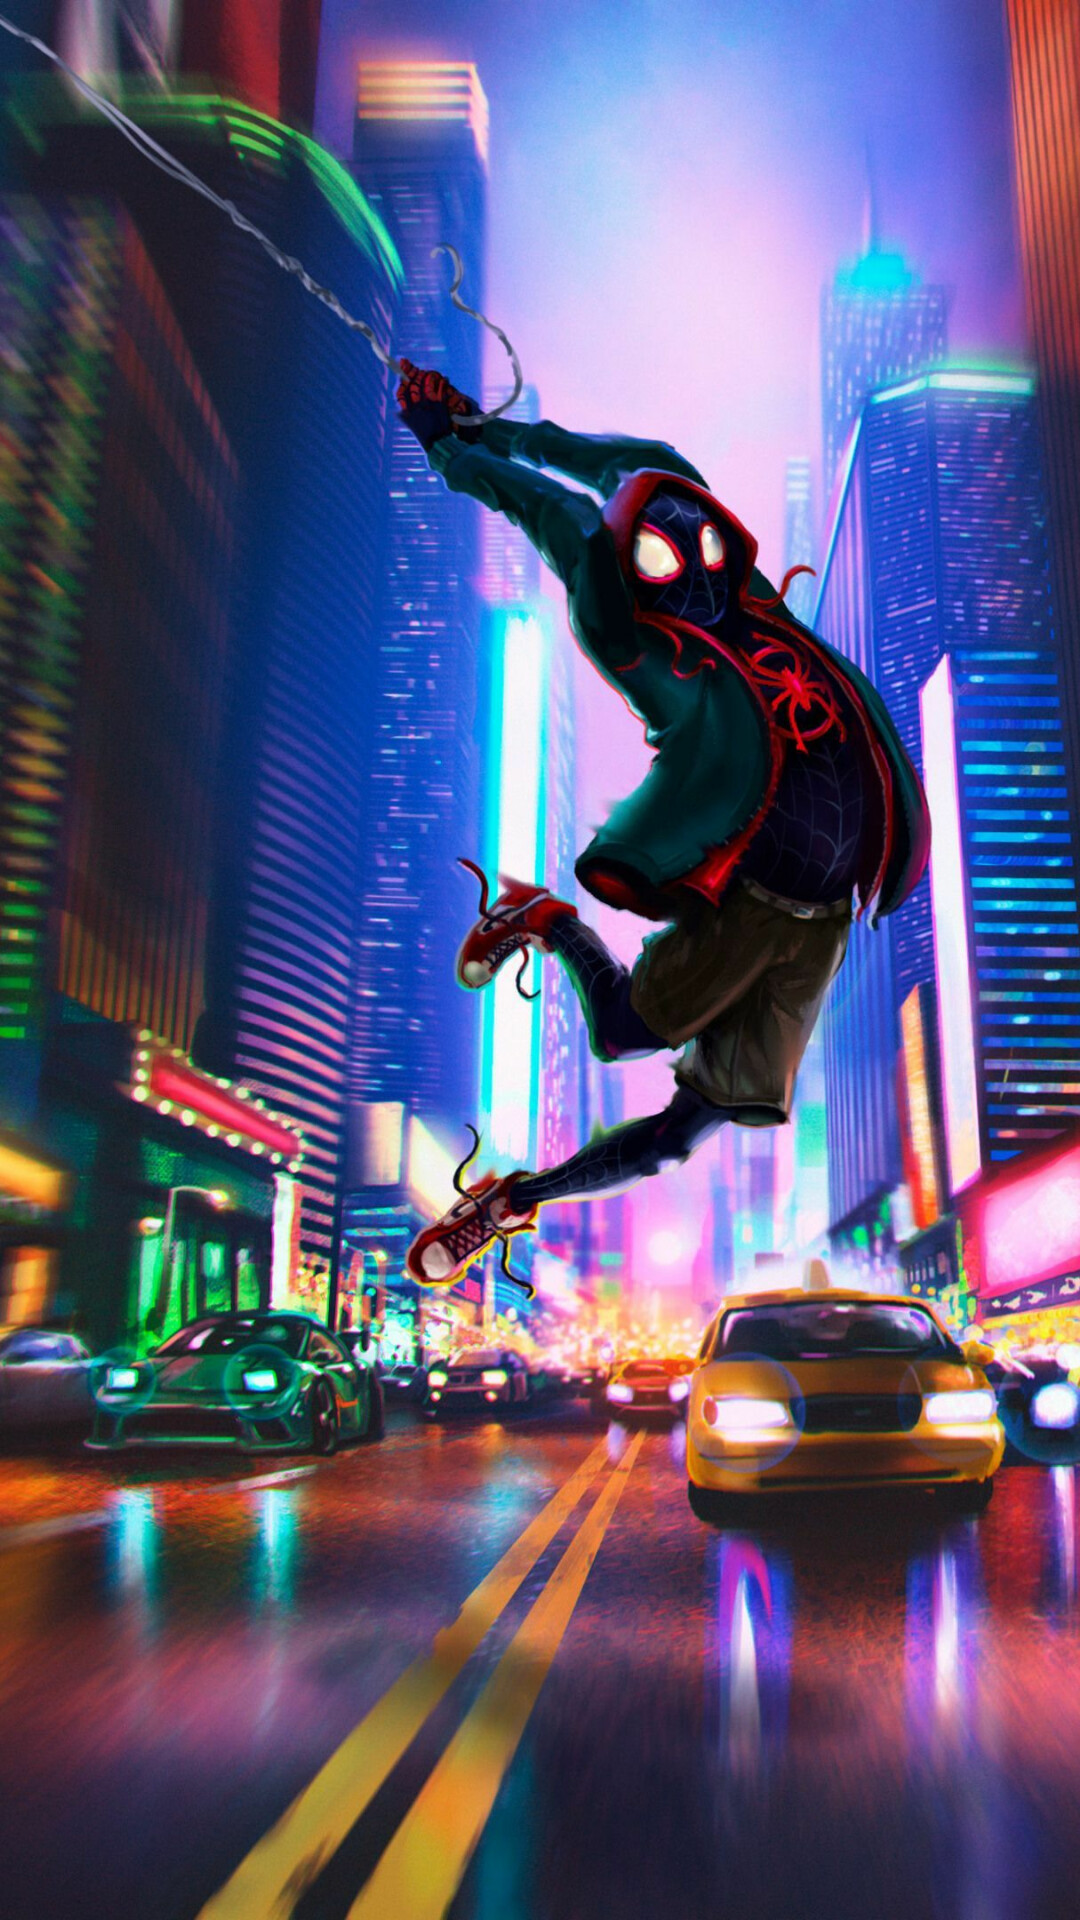 Spider-Man: Into the Spider-Verse: The first animated film in the Spider-Man franchise. 1080x1920 Full HD Wallpaper.